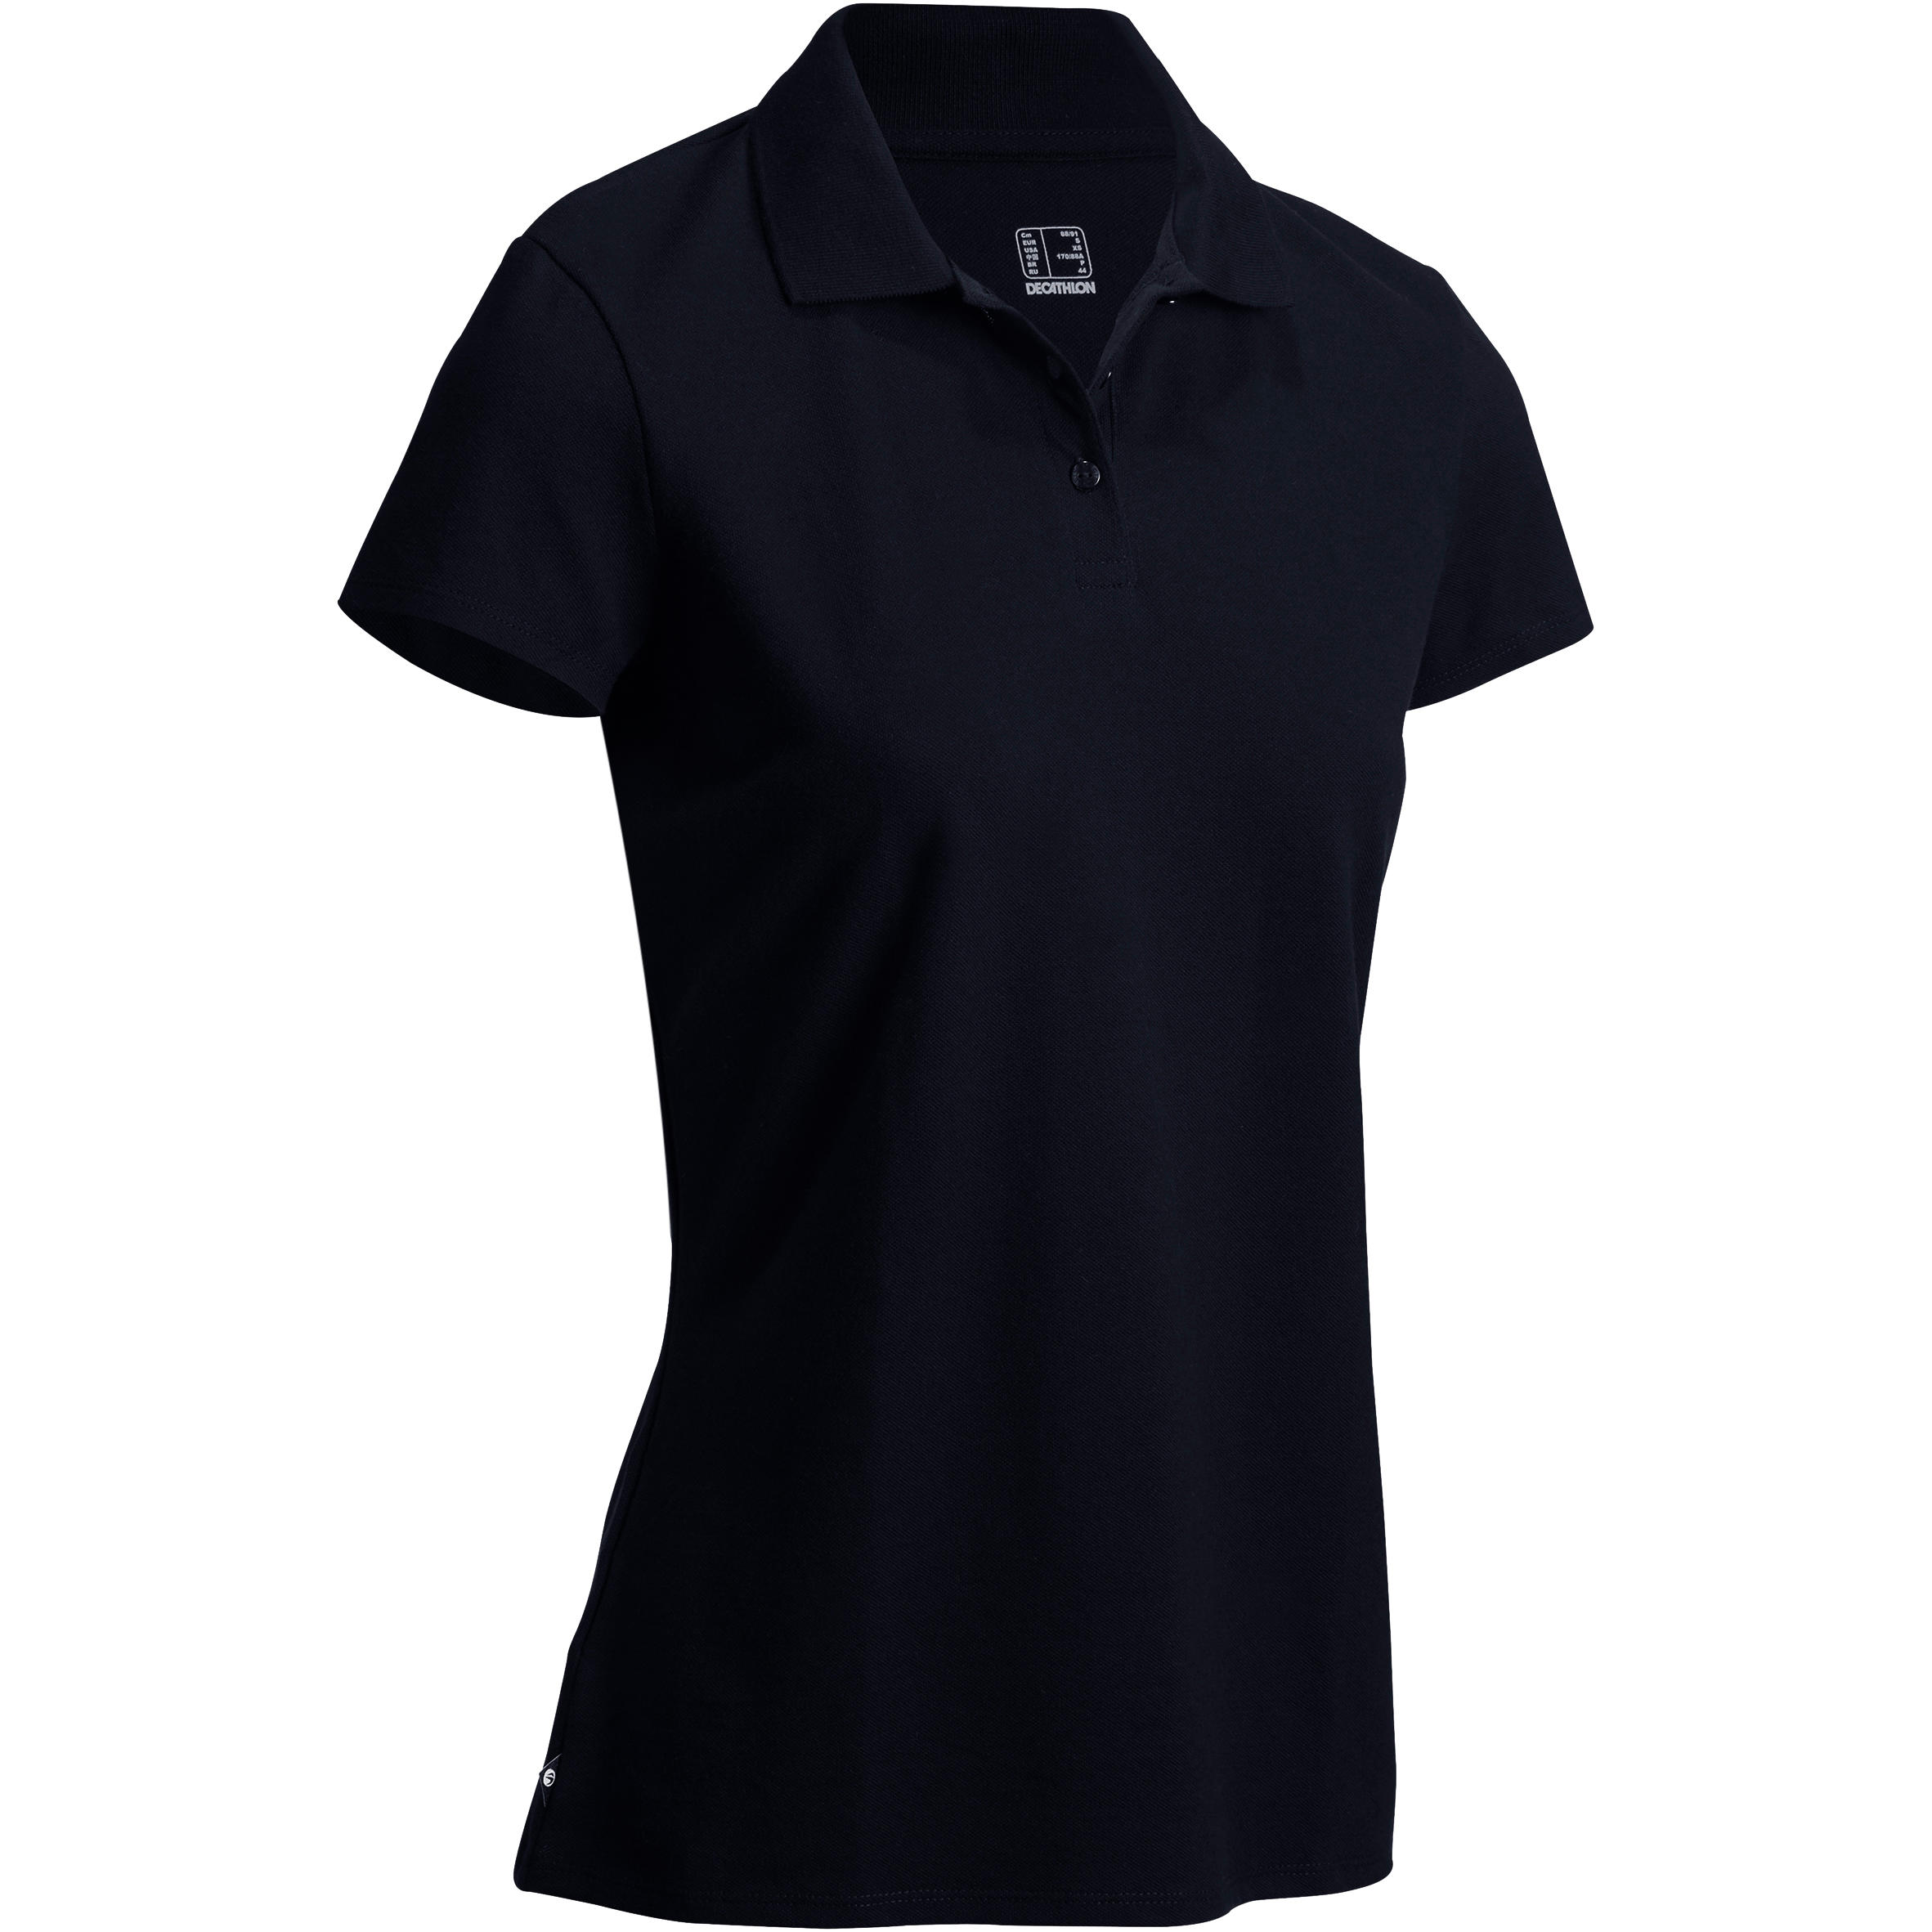 women's fitted black polo shirts